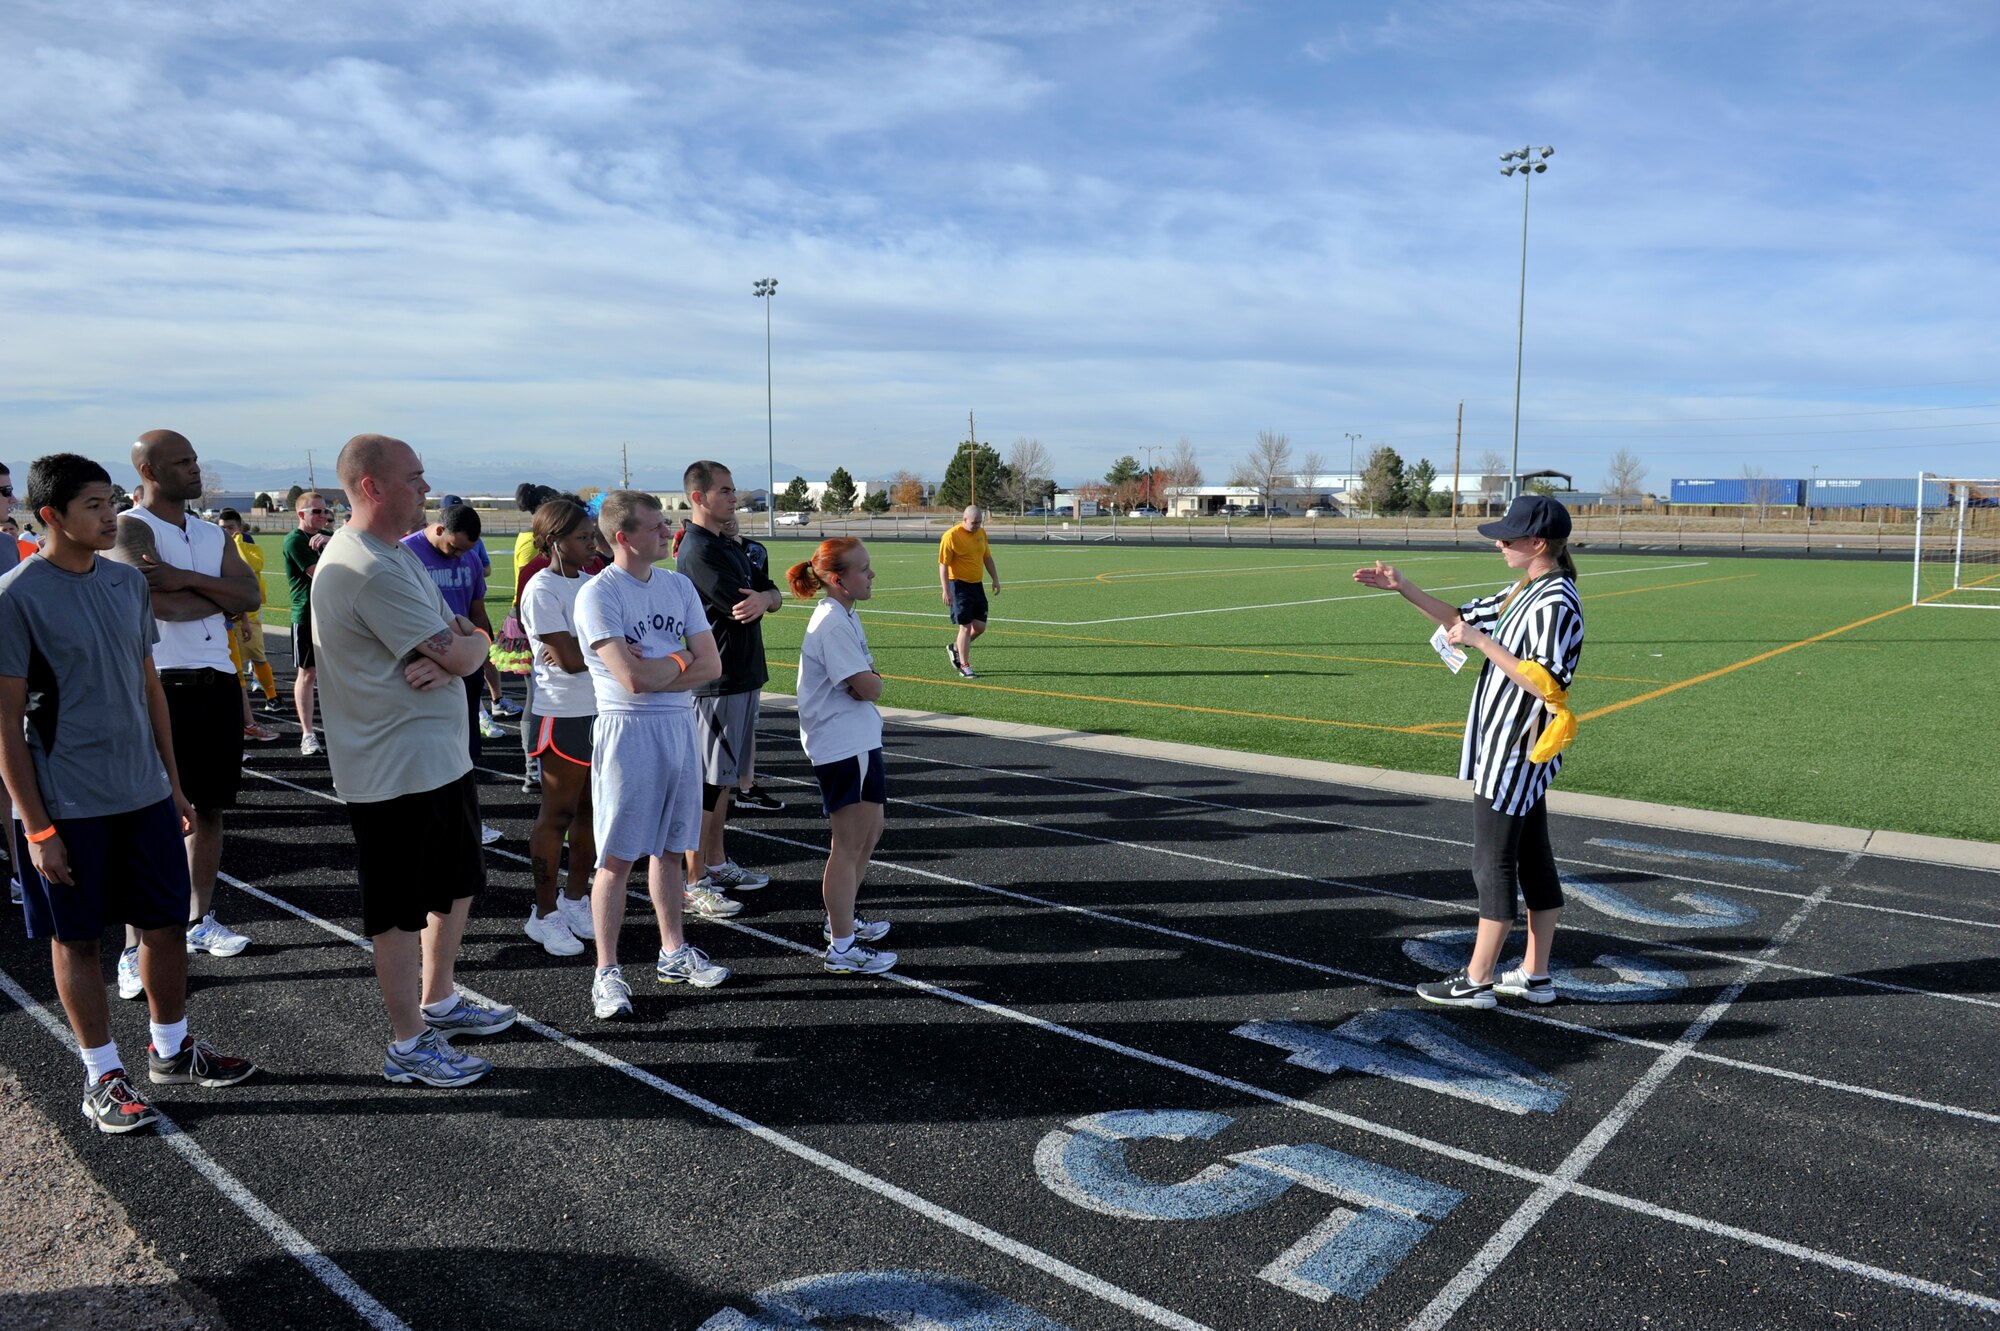 BUCKLEY AIR FORCE BASE, Colo. – Heather Huckstep, right, Buckley Fitness Center recreational assistant, reads instructions to runners before the start of Buckley's Dreadful Dash 5K Oct. 31, 2012, at the fitness center track. Capt. John Radar, 566th Intelligence Squadron, won the race. (U.S. Air Force photo by Senior Airman Christopher Gross)